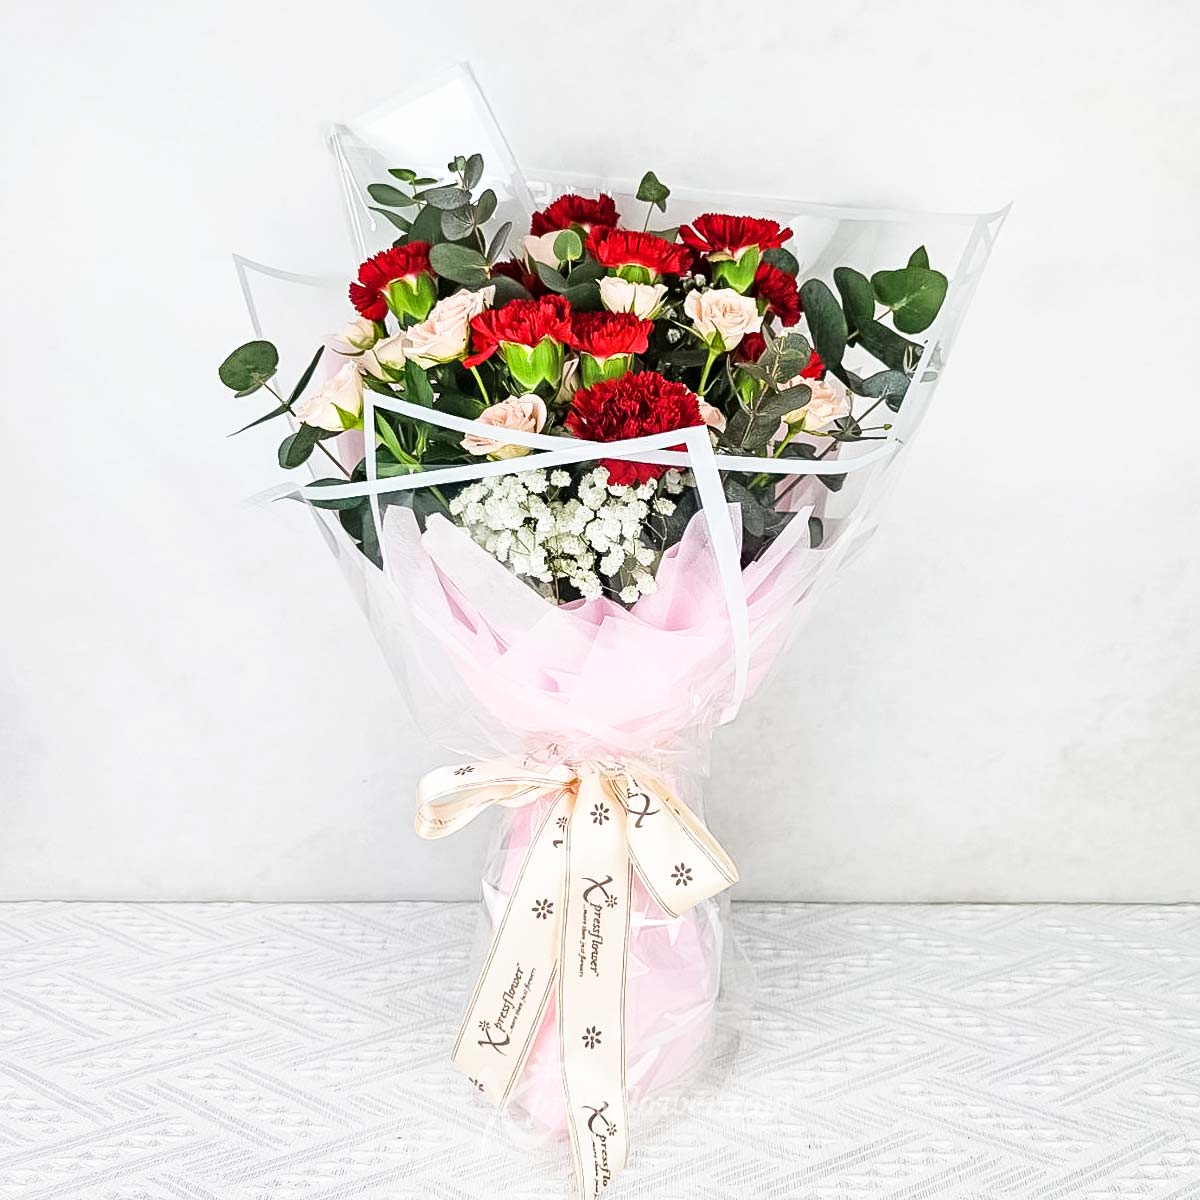 Crimson Charm (12 Red Carnations with Pink Rose Sprays)